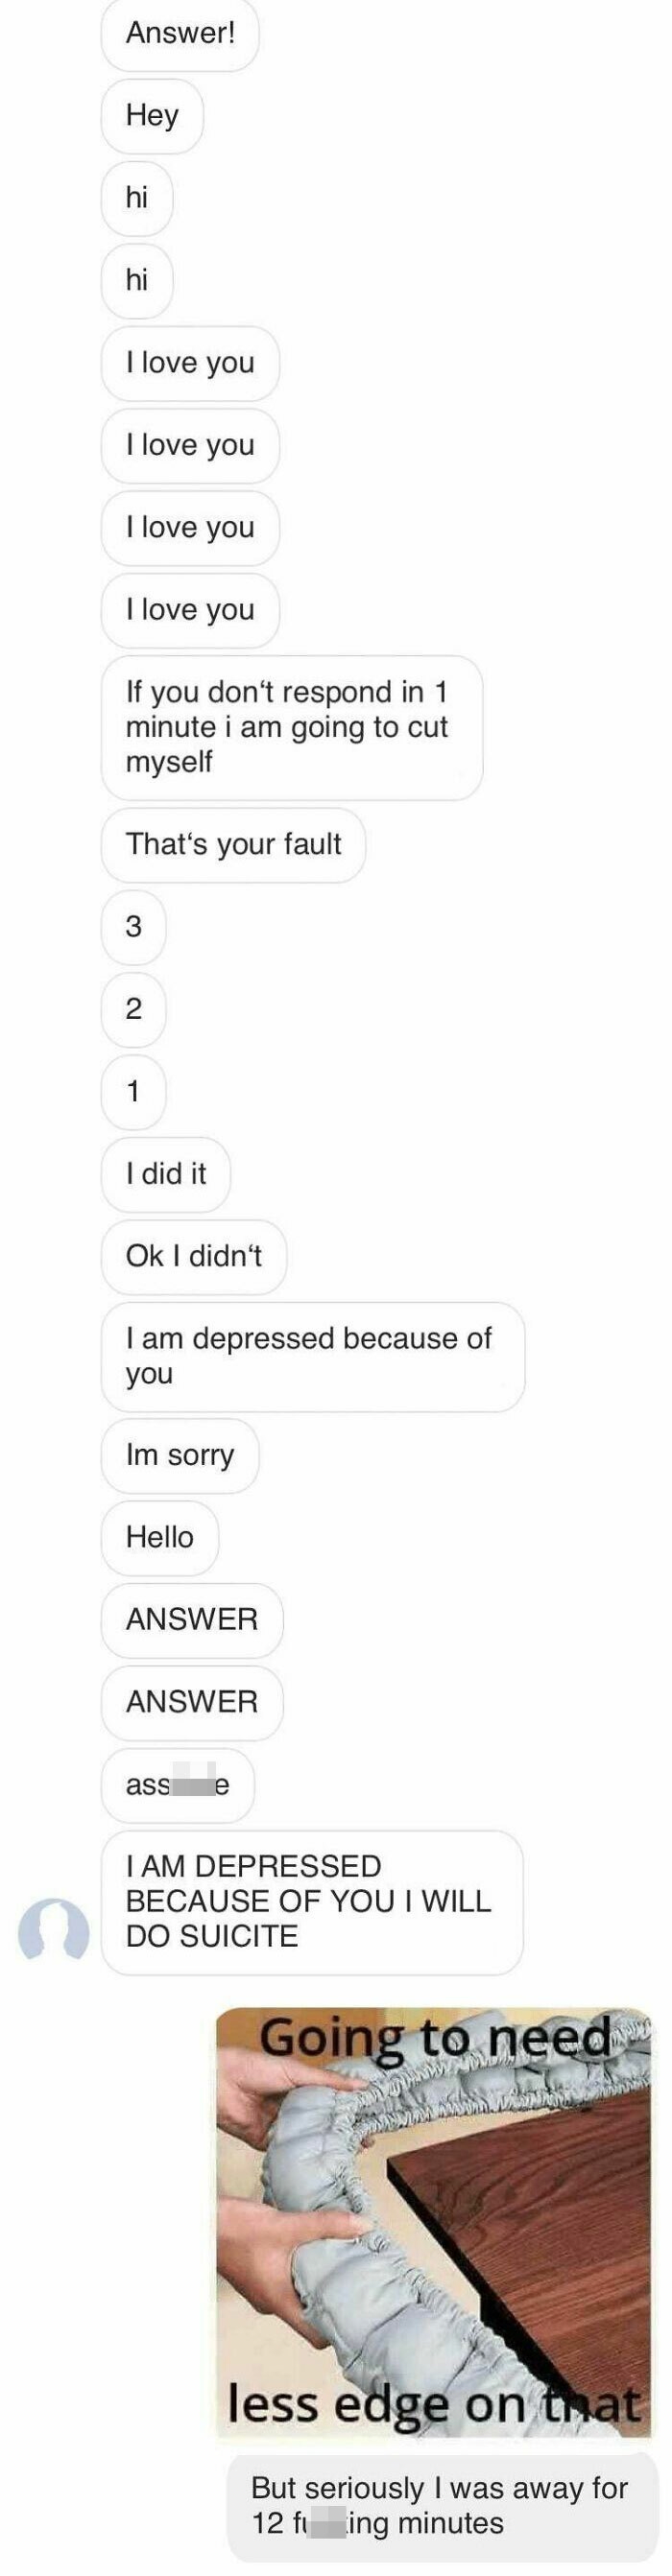 paper - haw Answer! Hey hi hi I love you I love you I love you I love you If you don't respond in 1 minute i am going to cut myself That's your fault 3 2 1 I did it Ok I didn't I am depressed because of you Im sorry Hello Answer Answer ass e Tam Depressed